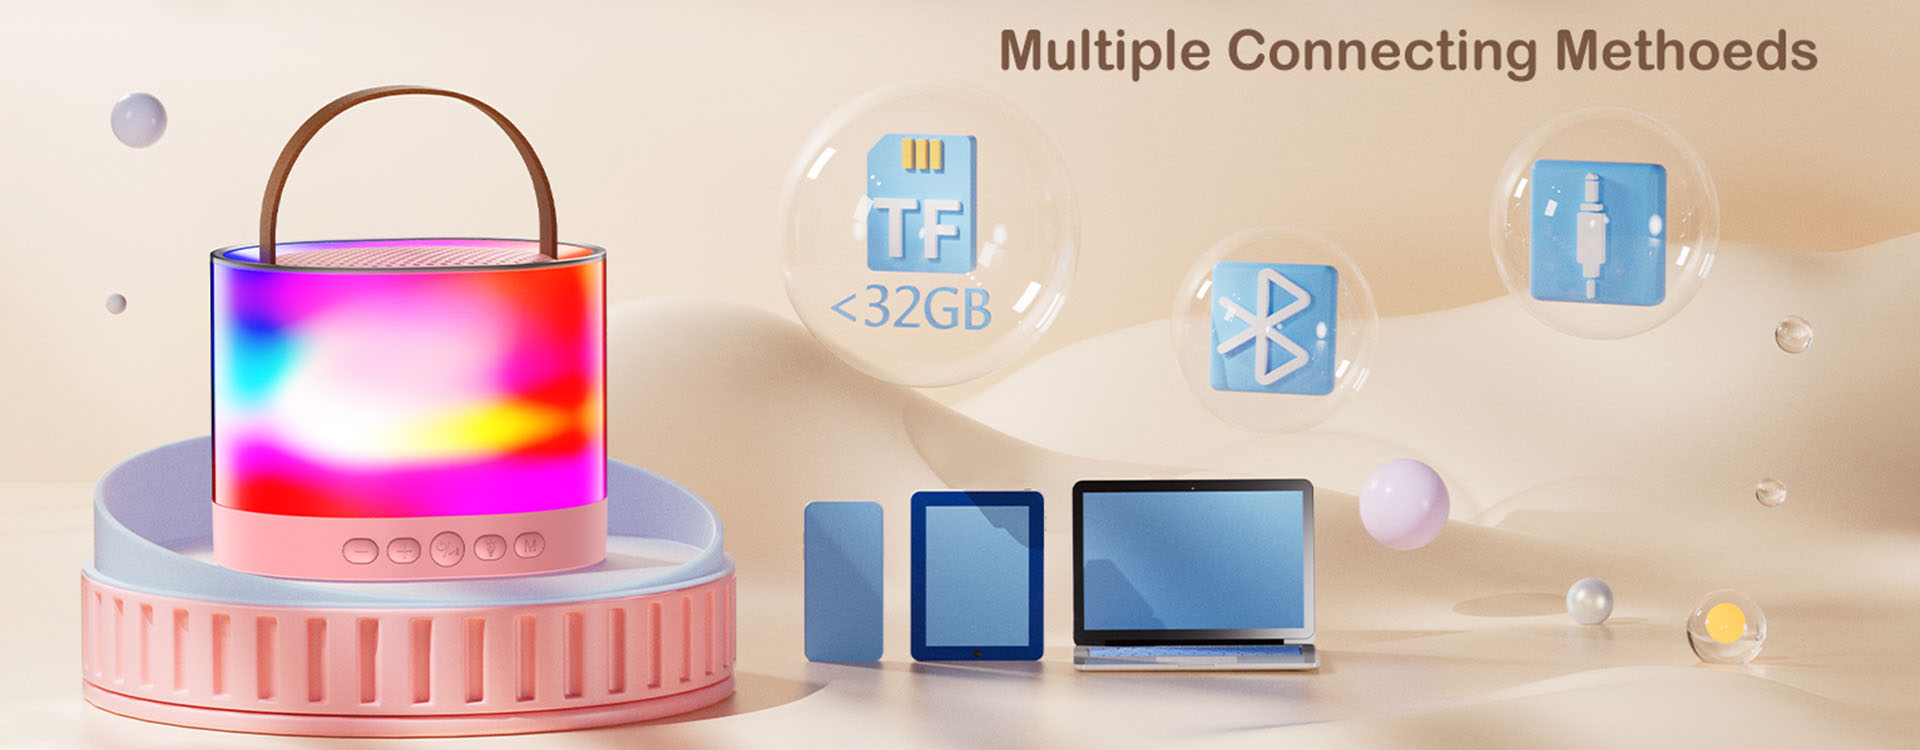 JYX D23 Mini Karaoke for Kids with Wireless Microphones. Multiple connecting methods, TF<32GB.